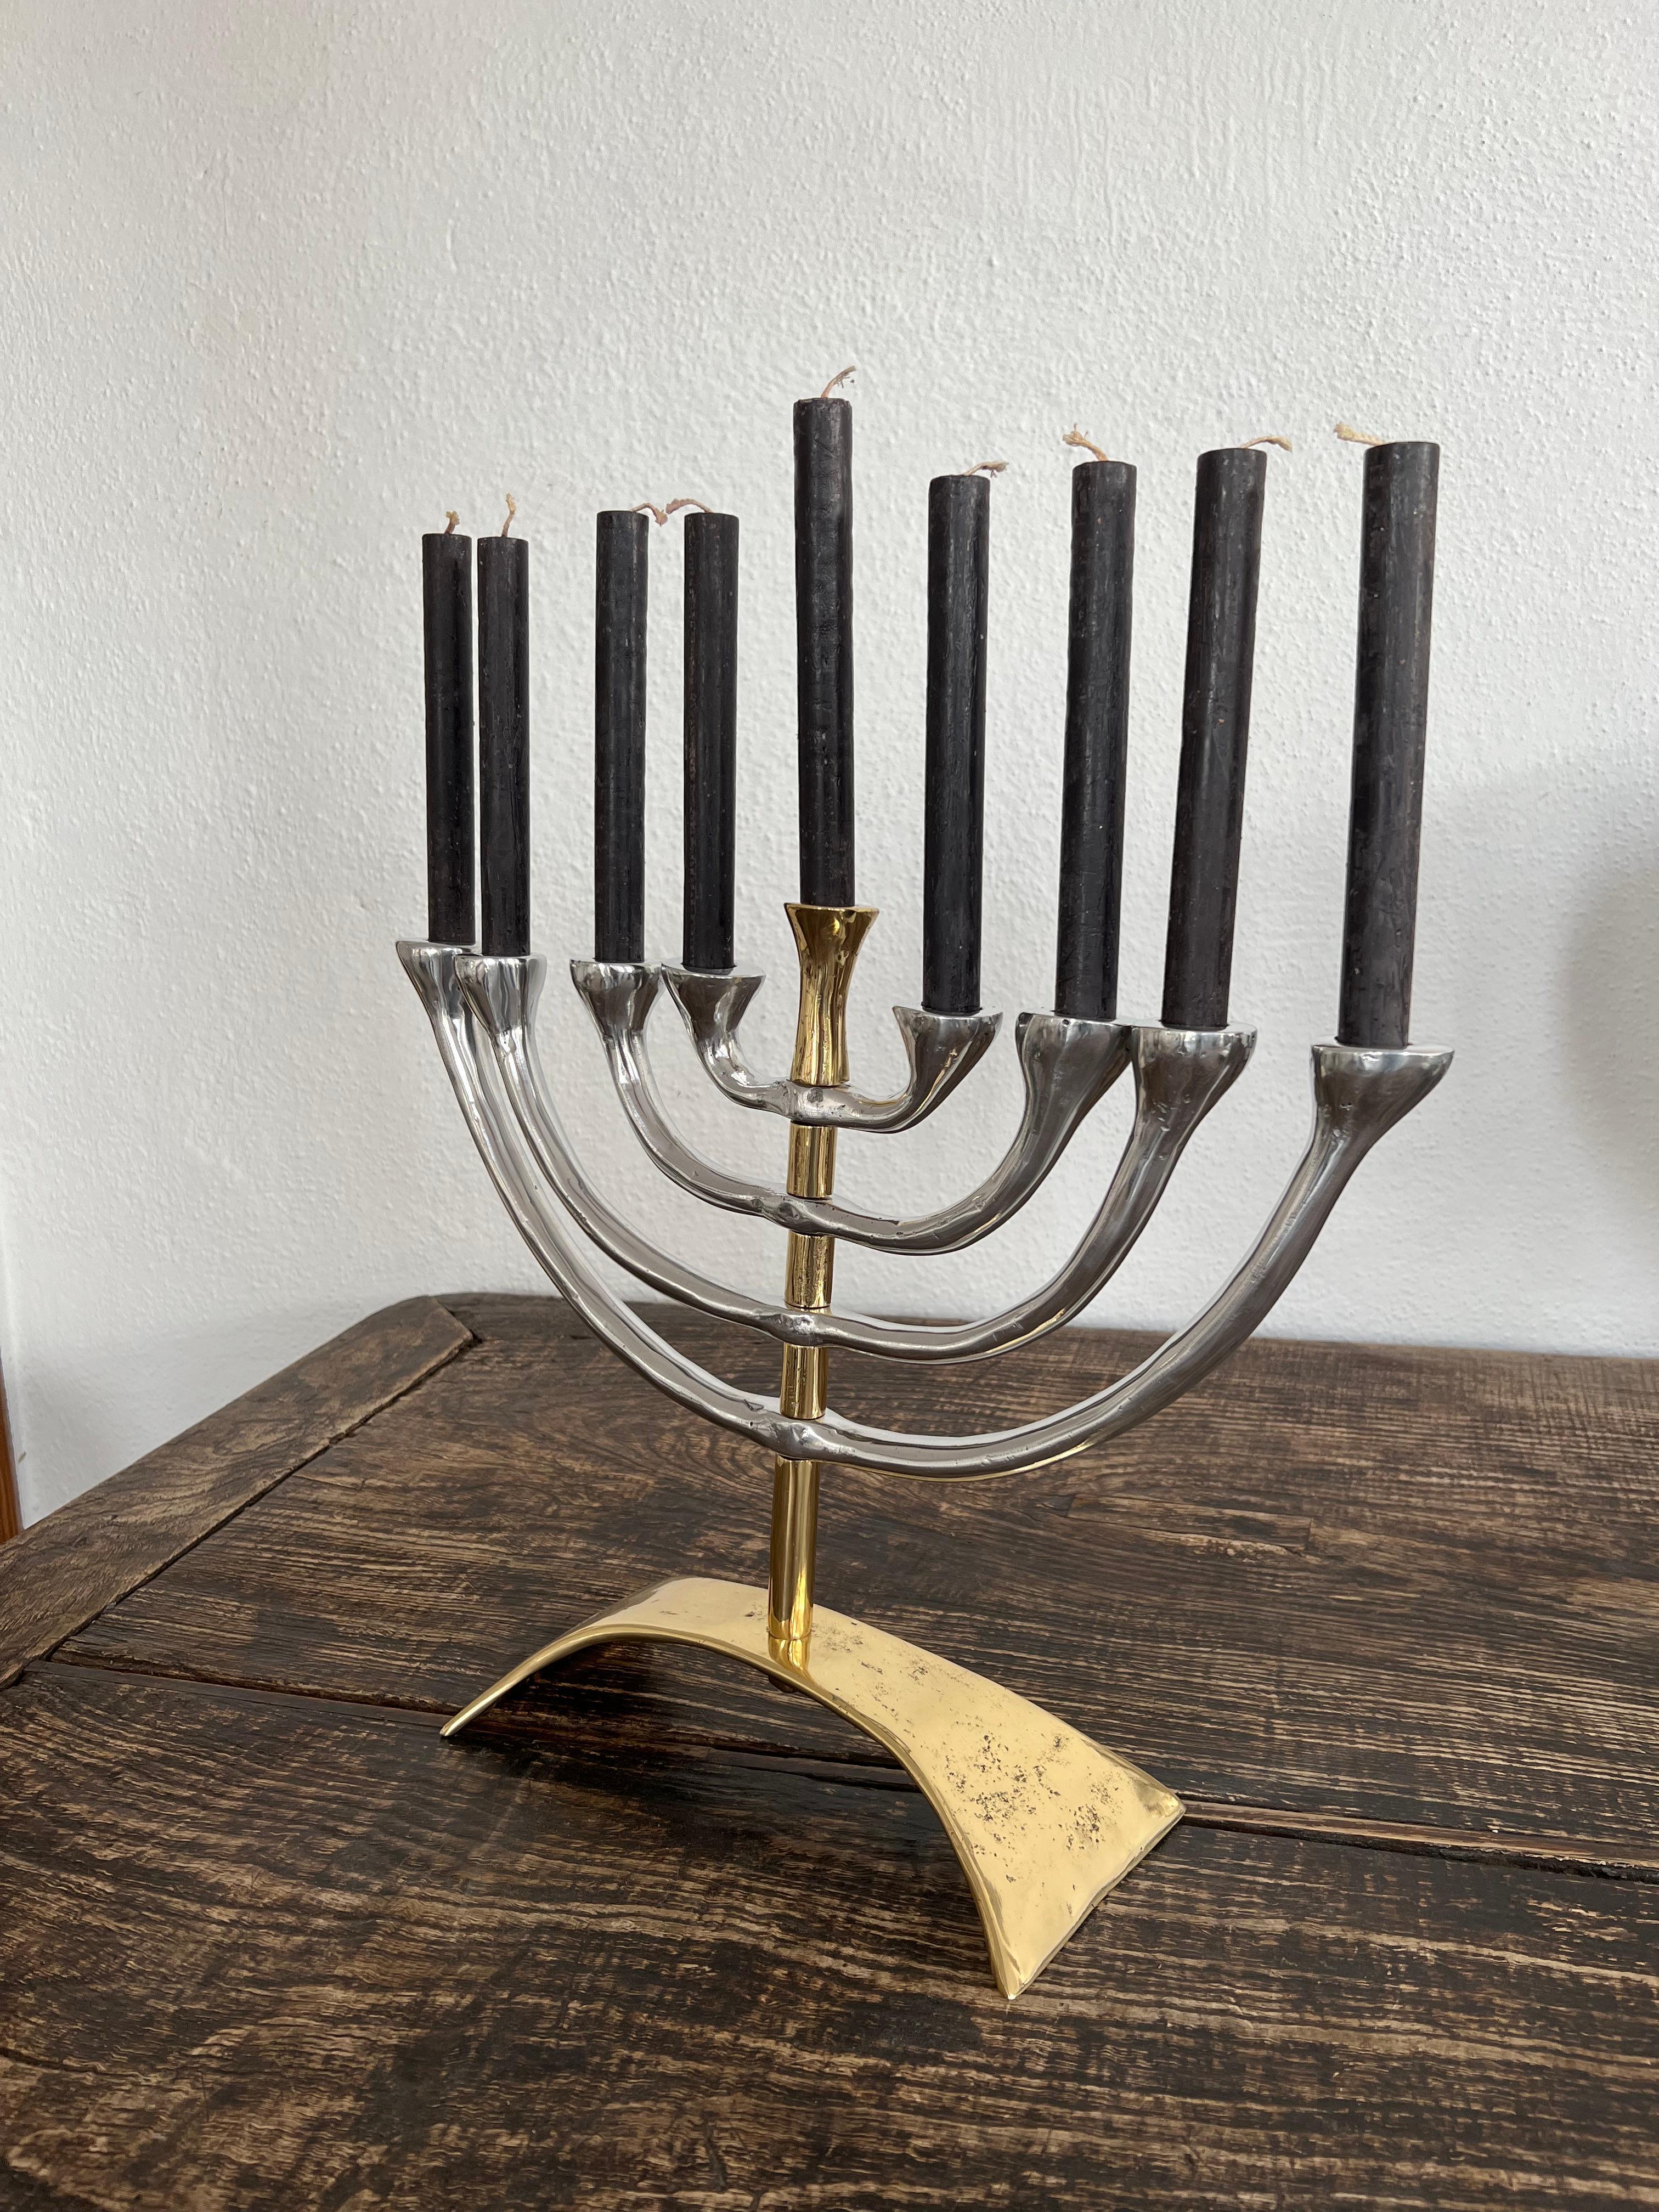 The decorative Menorah was created by David Marshall, it is made of sand cast aluminum and sand cast brass.
Handmade, mounted and finished in our foundry and workshop in Spain from recycled materials.
Certified authentic by the Artist David